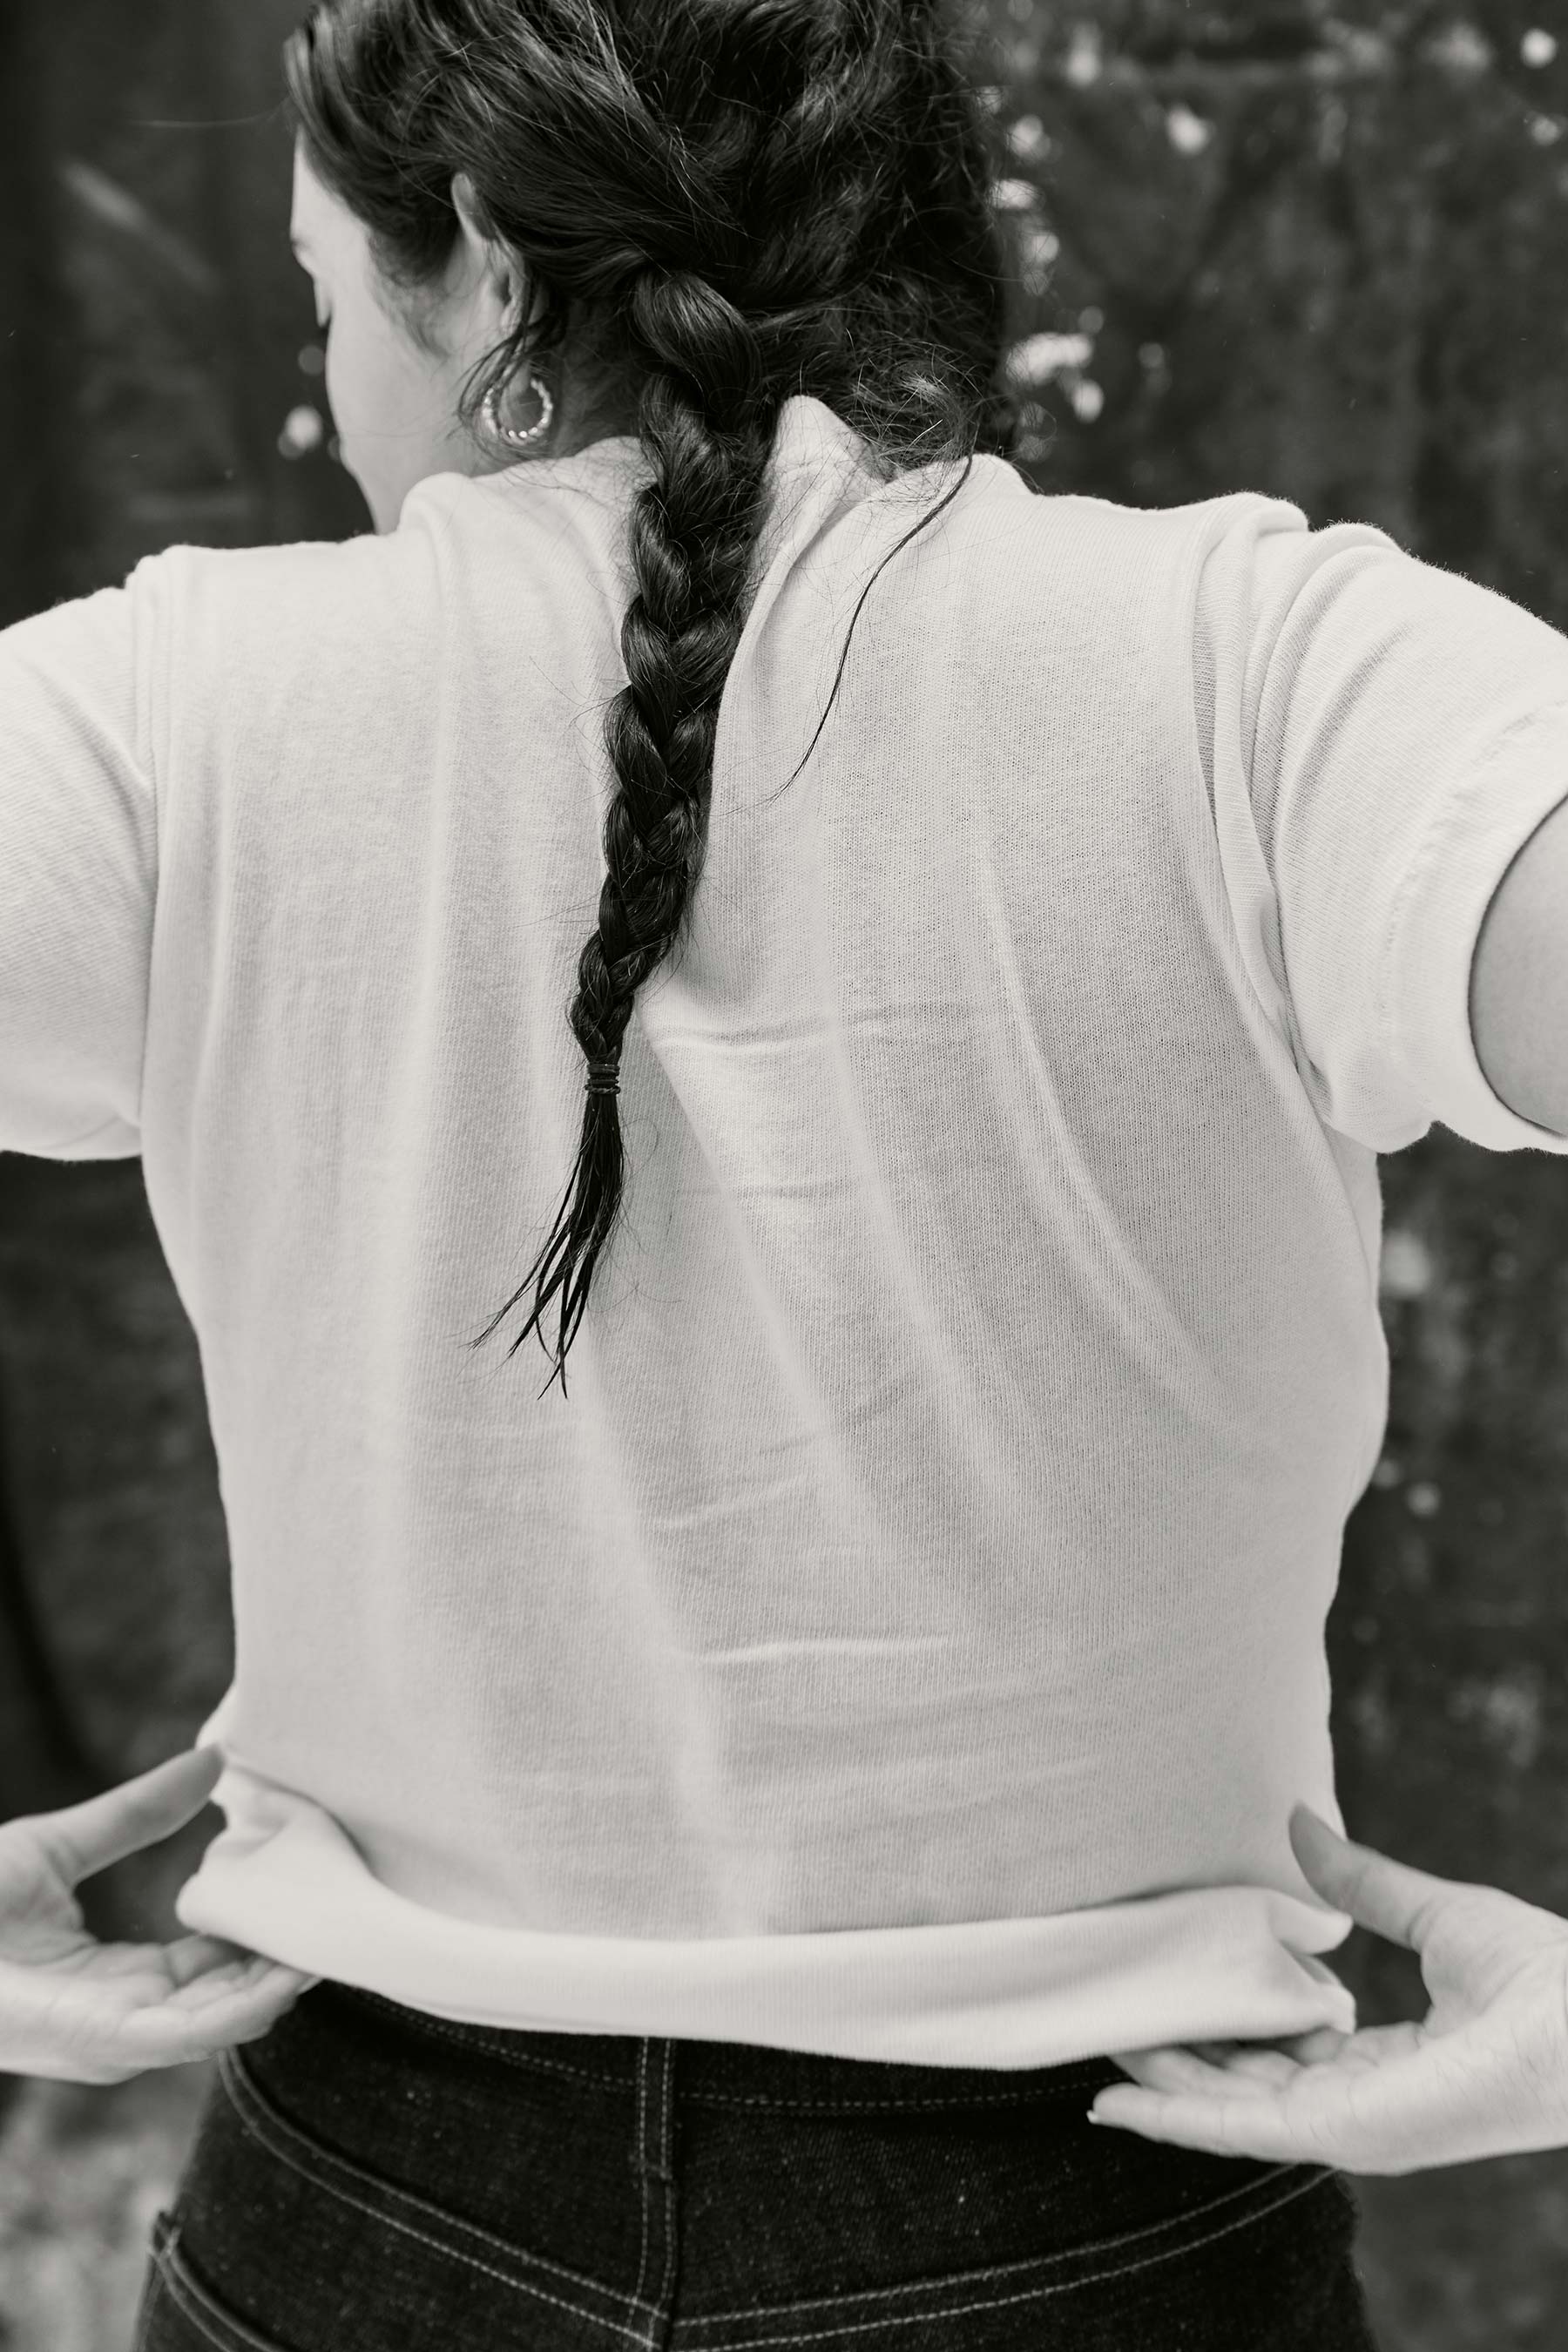 Hair, Joint, Hairstyle, Arm, Photograph, Shoulder, White, Black, Smile, Neck